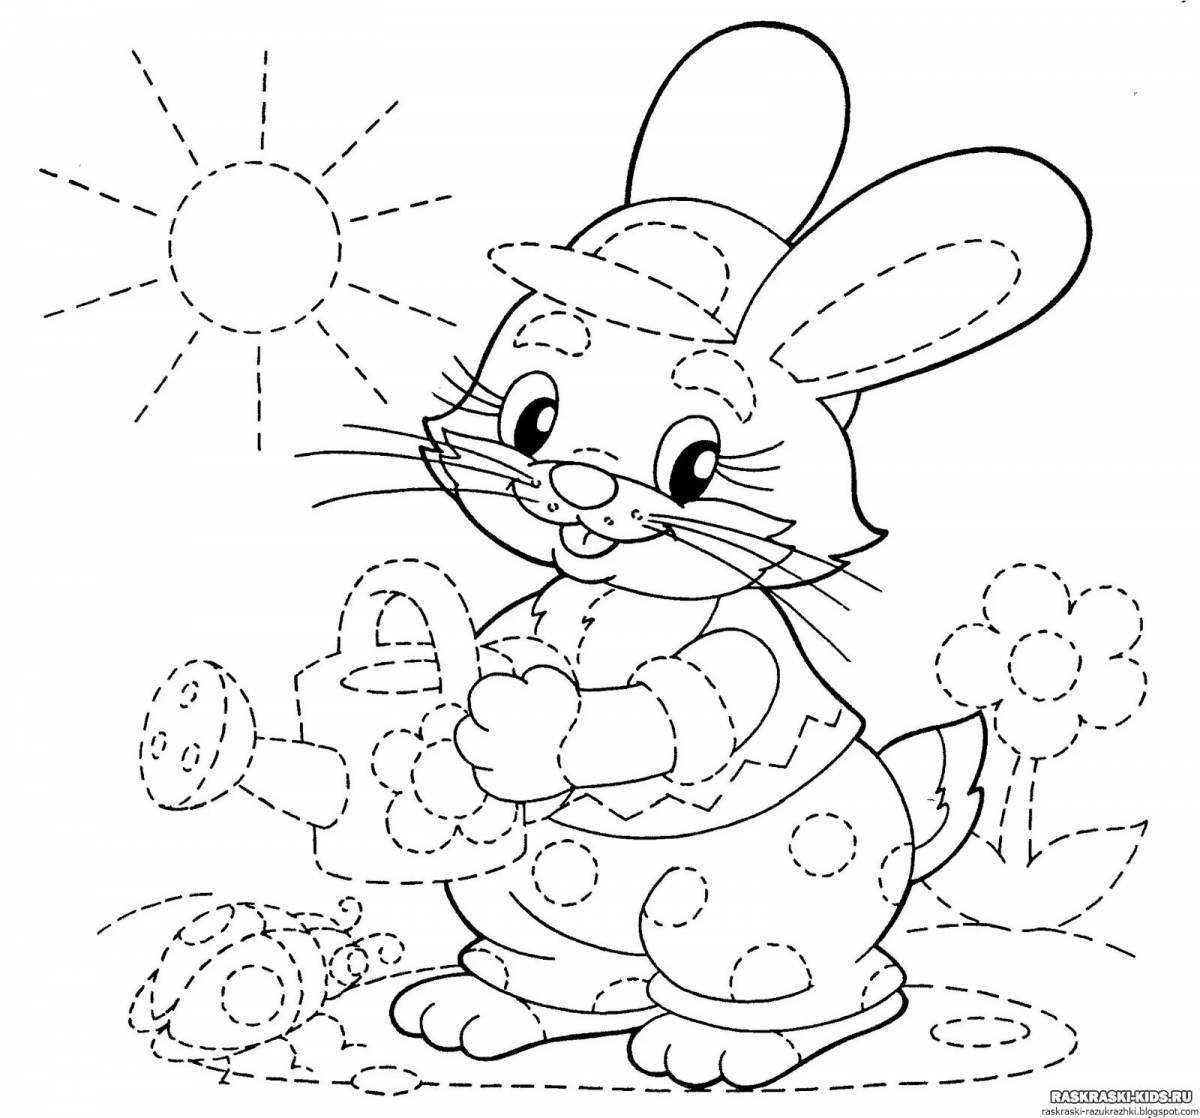 Crazy coloring pages for kids 4 5